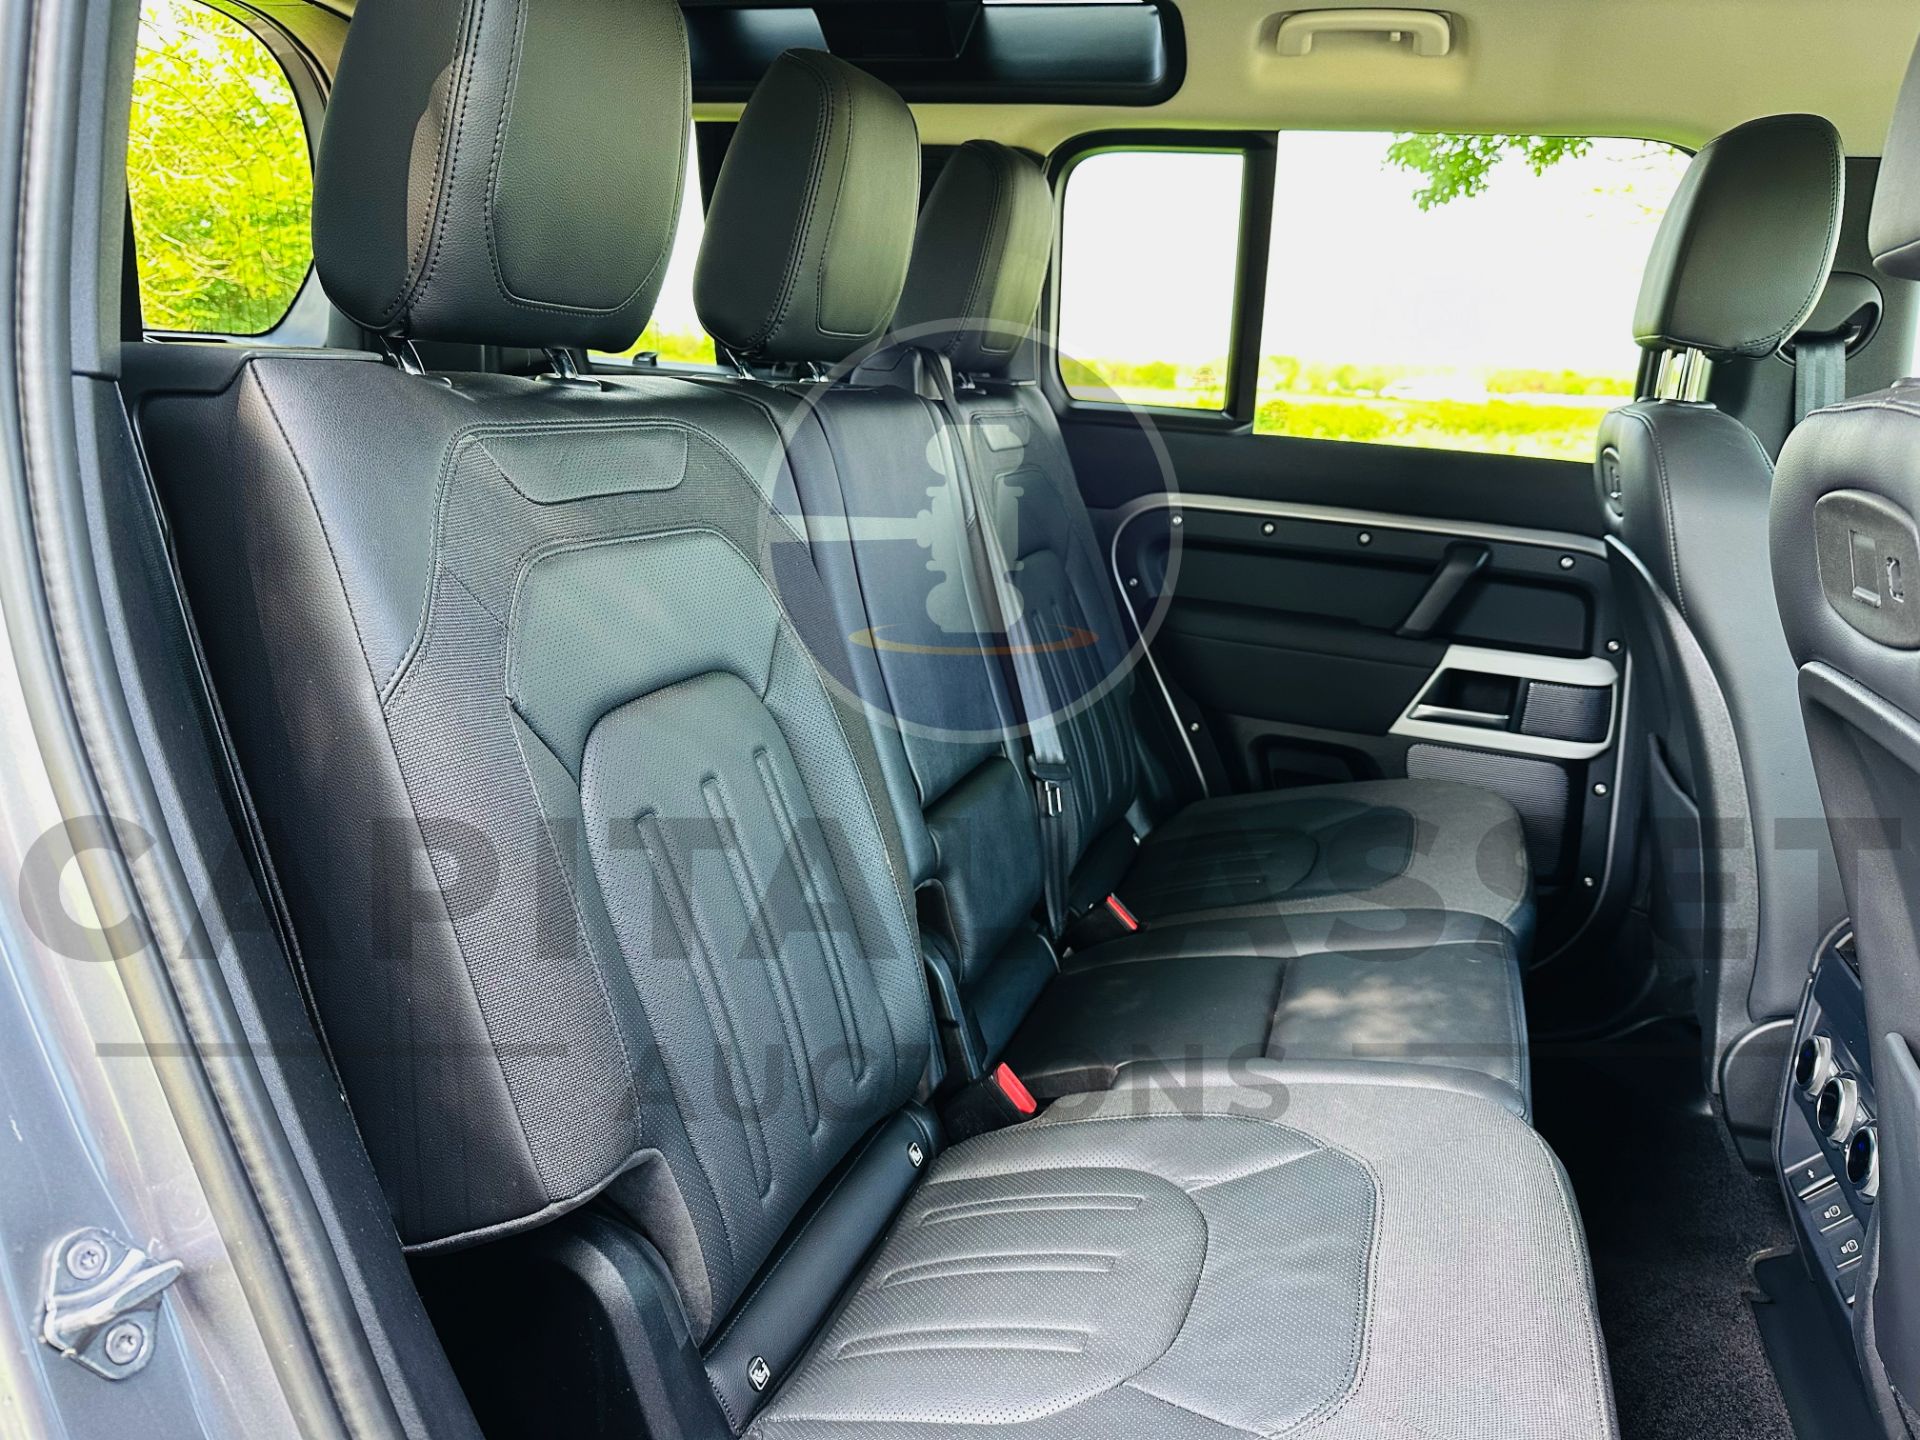 (On Sale) LAND ROVER DEFENDER 110 *SE EDITION* 7 SEATER SUV (2021) D300 - 8 SPEED AUTO *HUGE SPEC* - Image 27 of 63